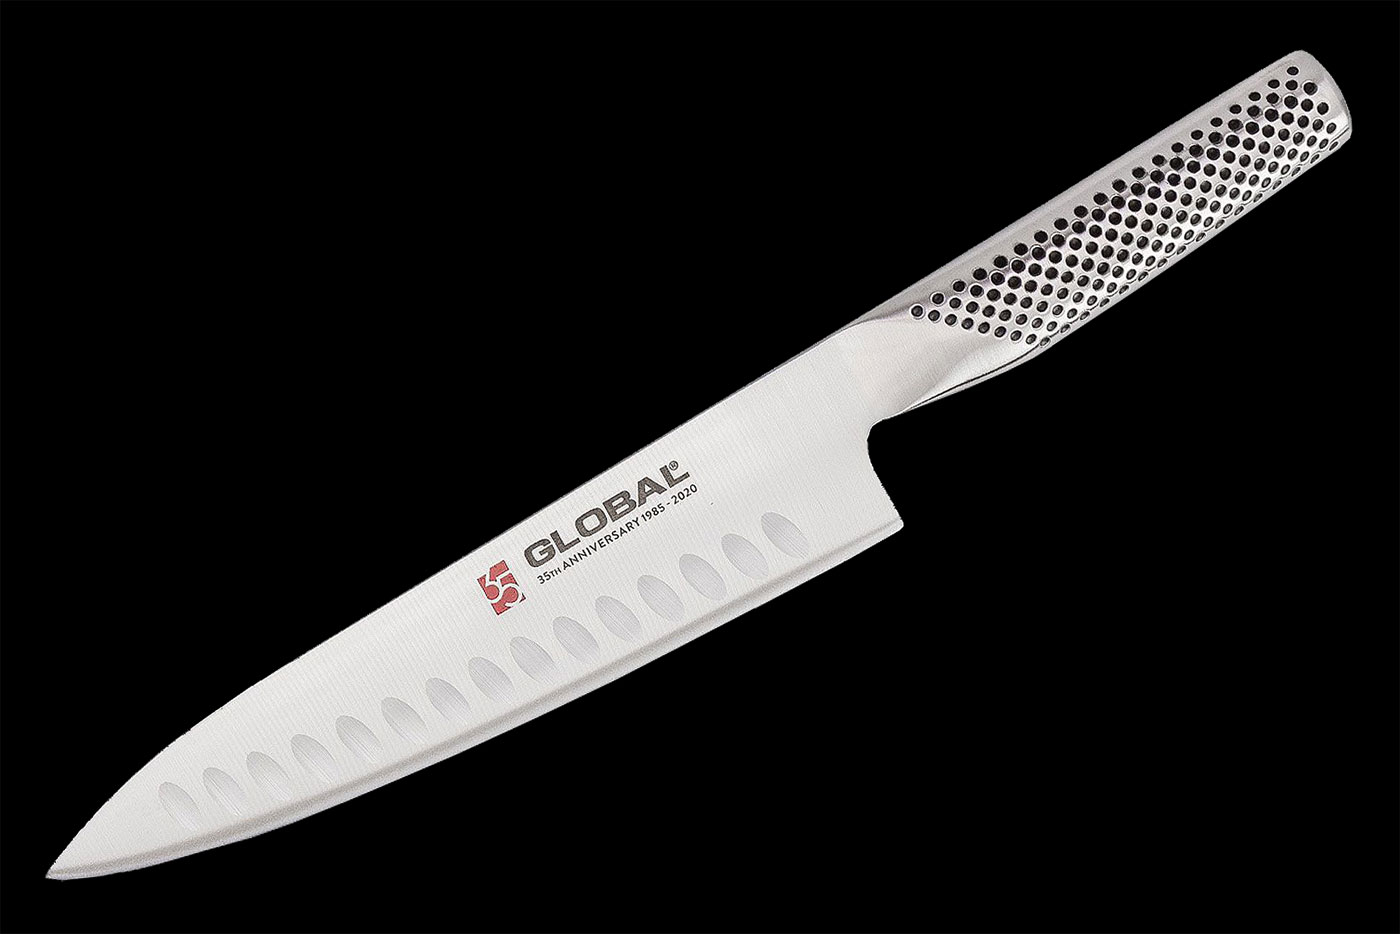 Global Chef's Knife with Granton Edge - 7-1/2 in. (G-96/AB) - 35th Anniversary Knife